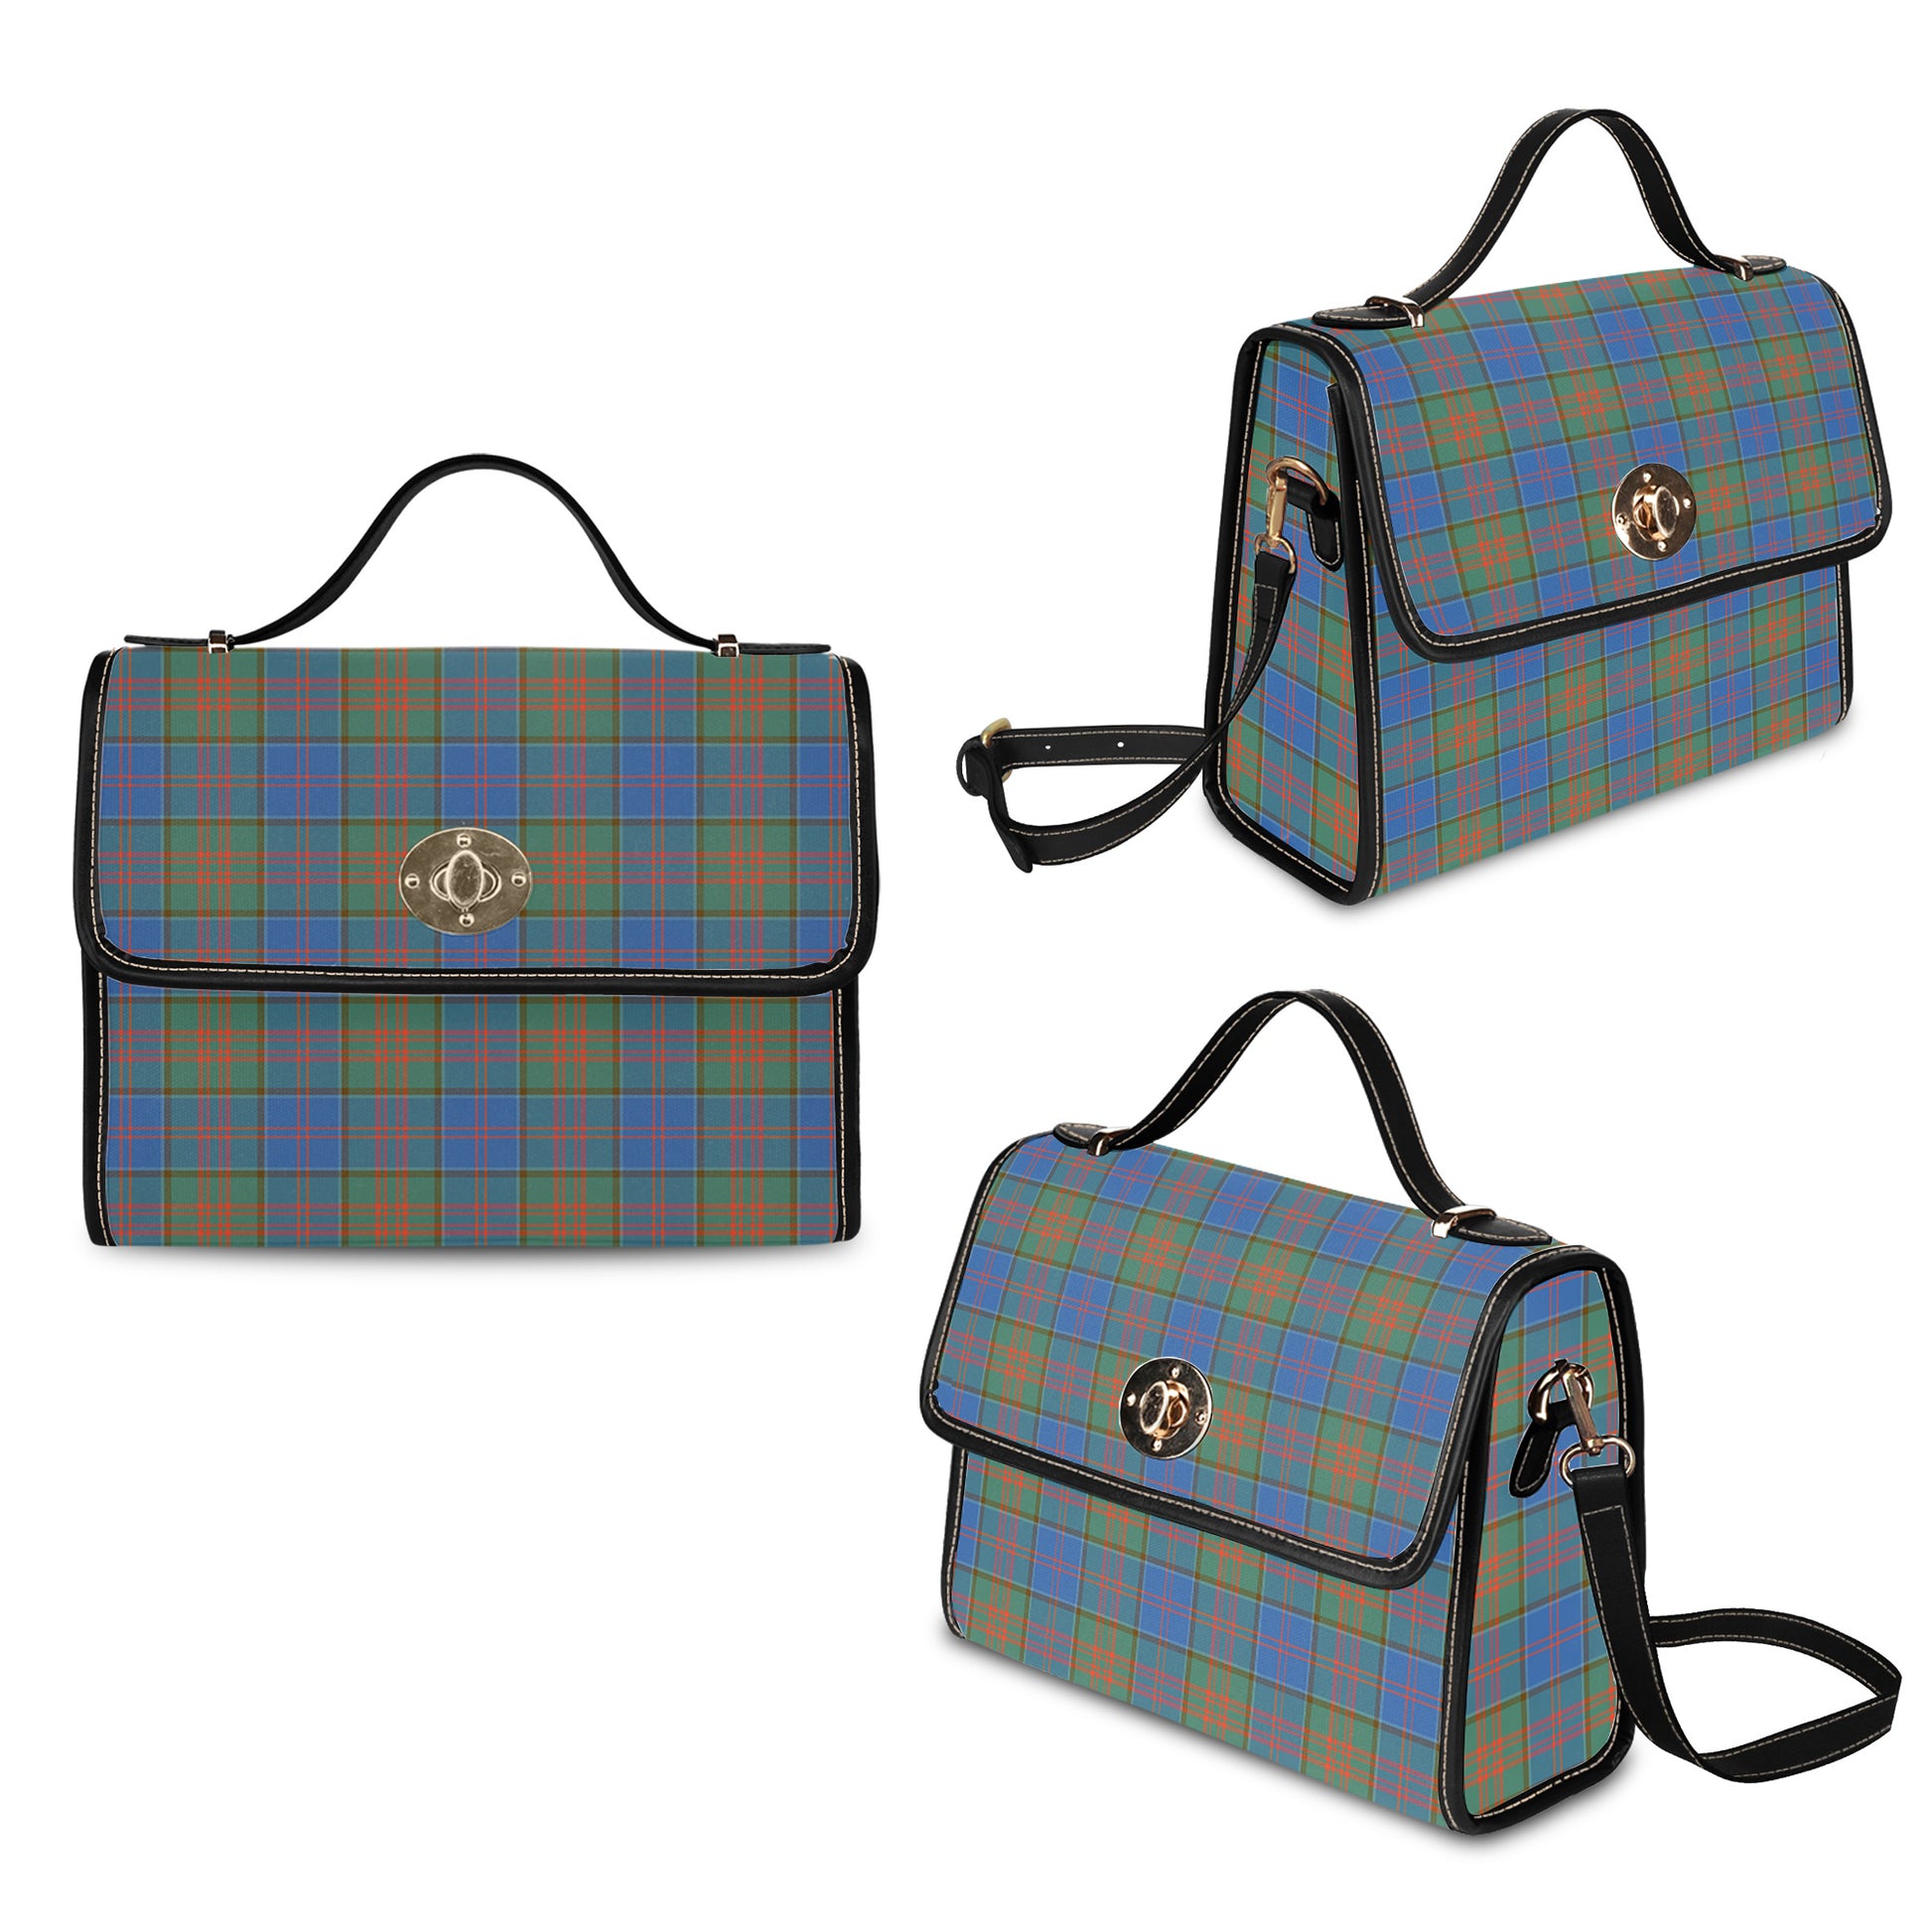 Stewart of Appin Hunting Ancient Tartan Leather Strap Waterproof Canvas Bag One Size 34cm * 42cm (13.4" x 16.5") - Tartanvibesclothing